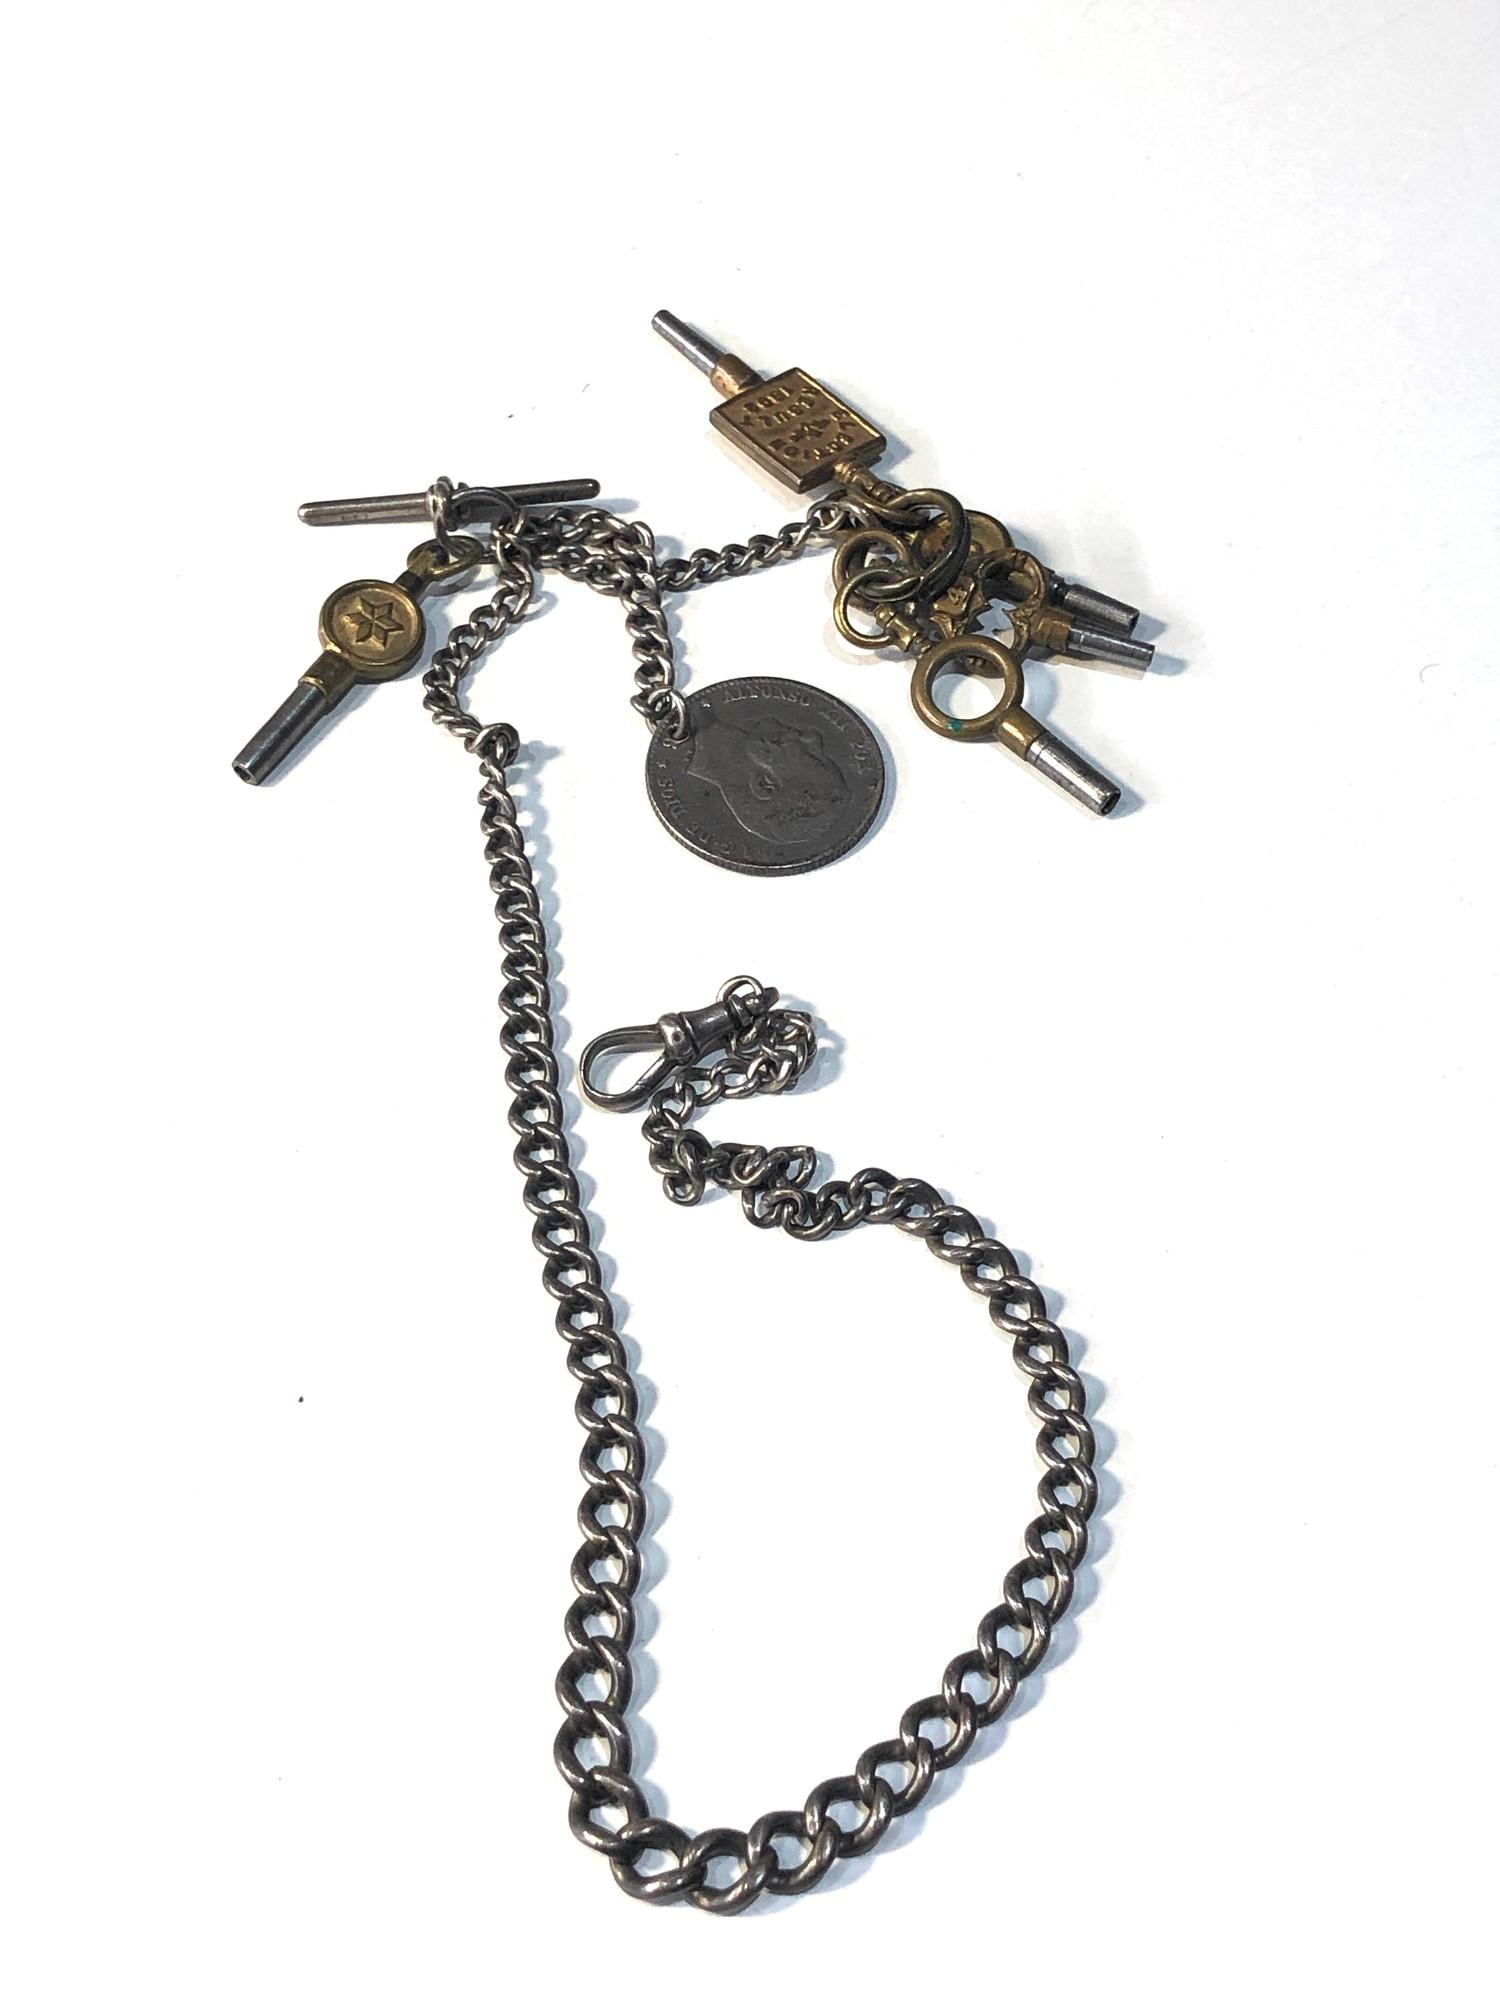 Silver watch chain with coin fob and keys total weight 39g